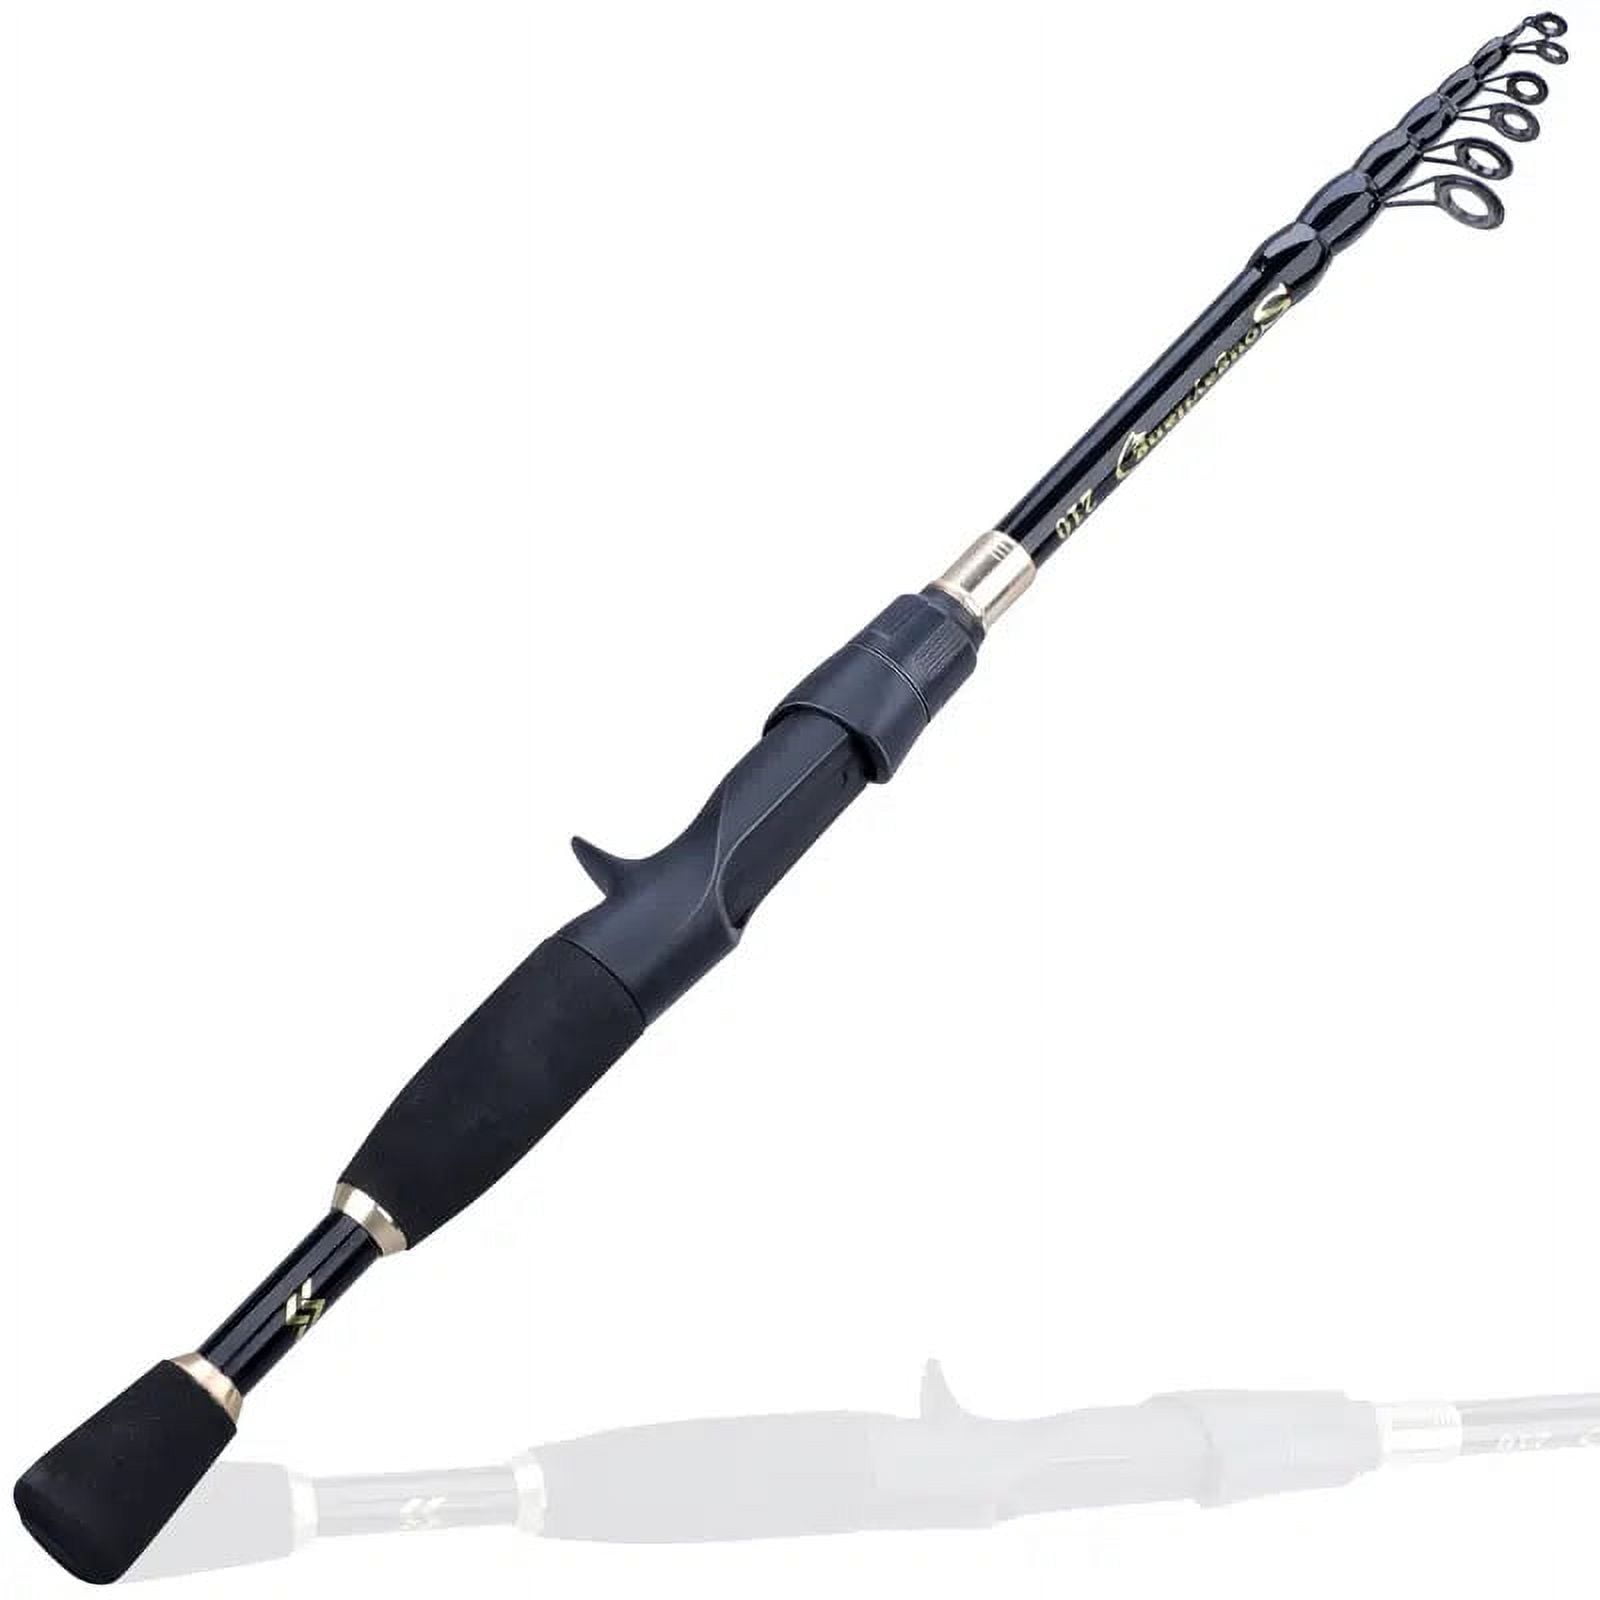 Telescopic Fishing Rod, 24T Carbon Casting/Spinning Travel